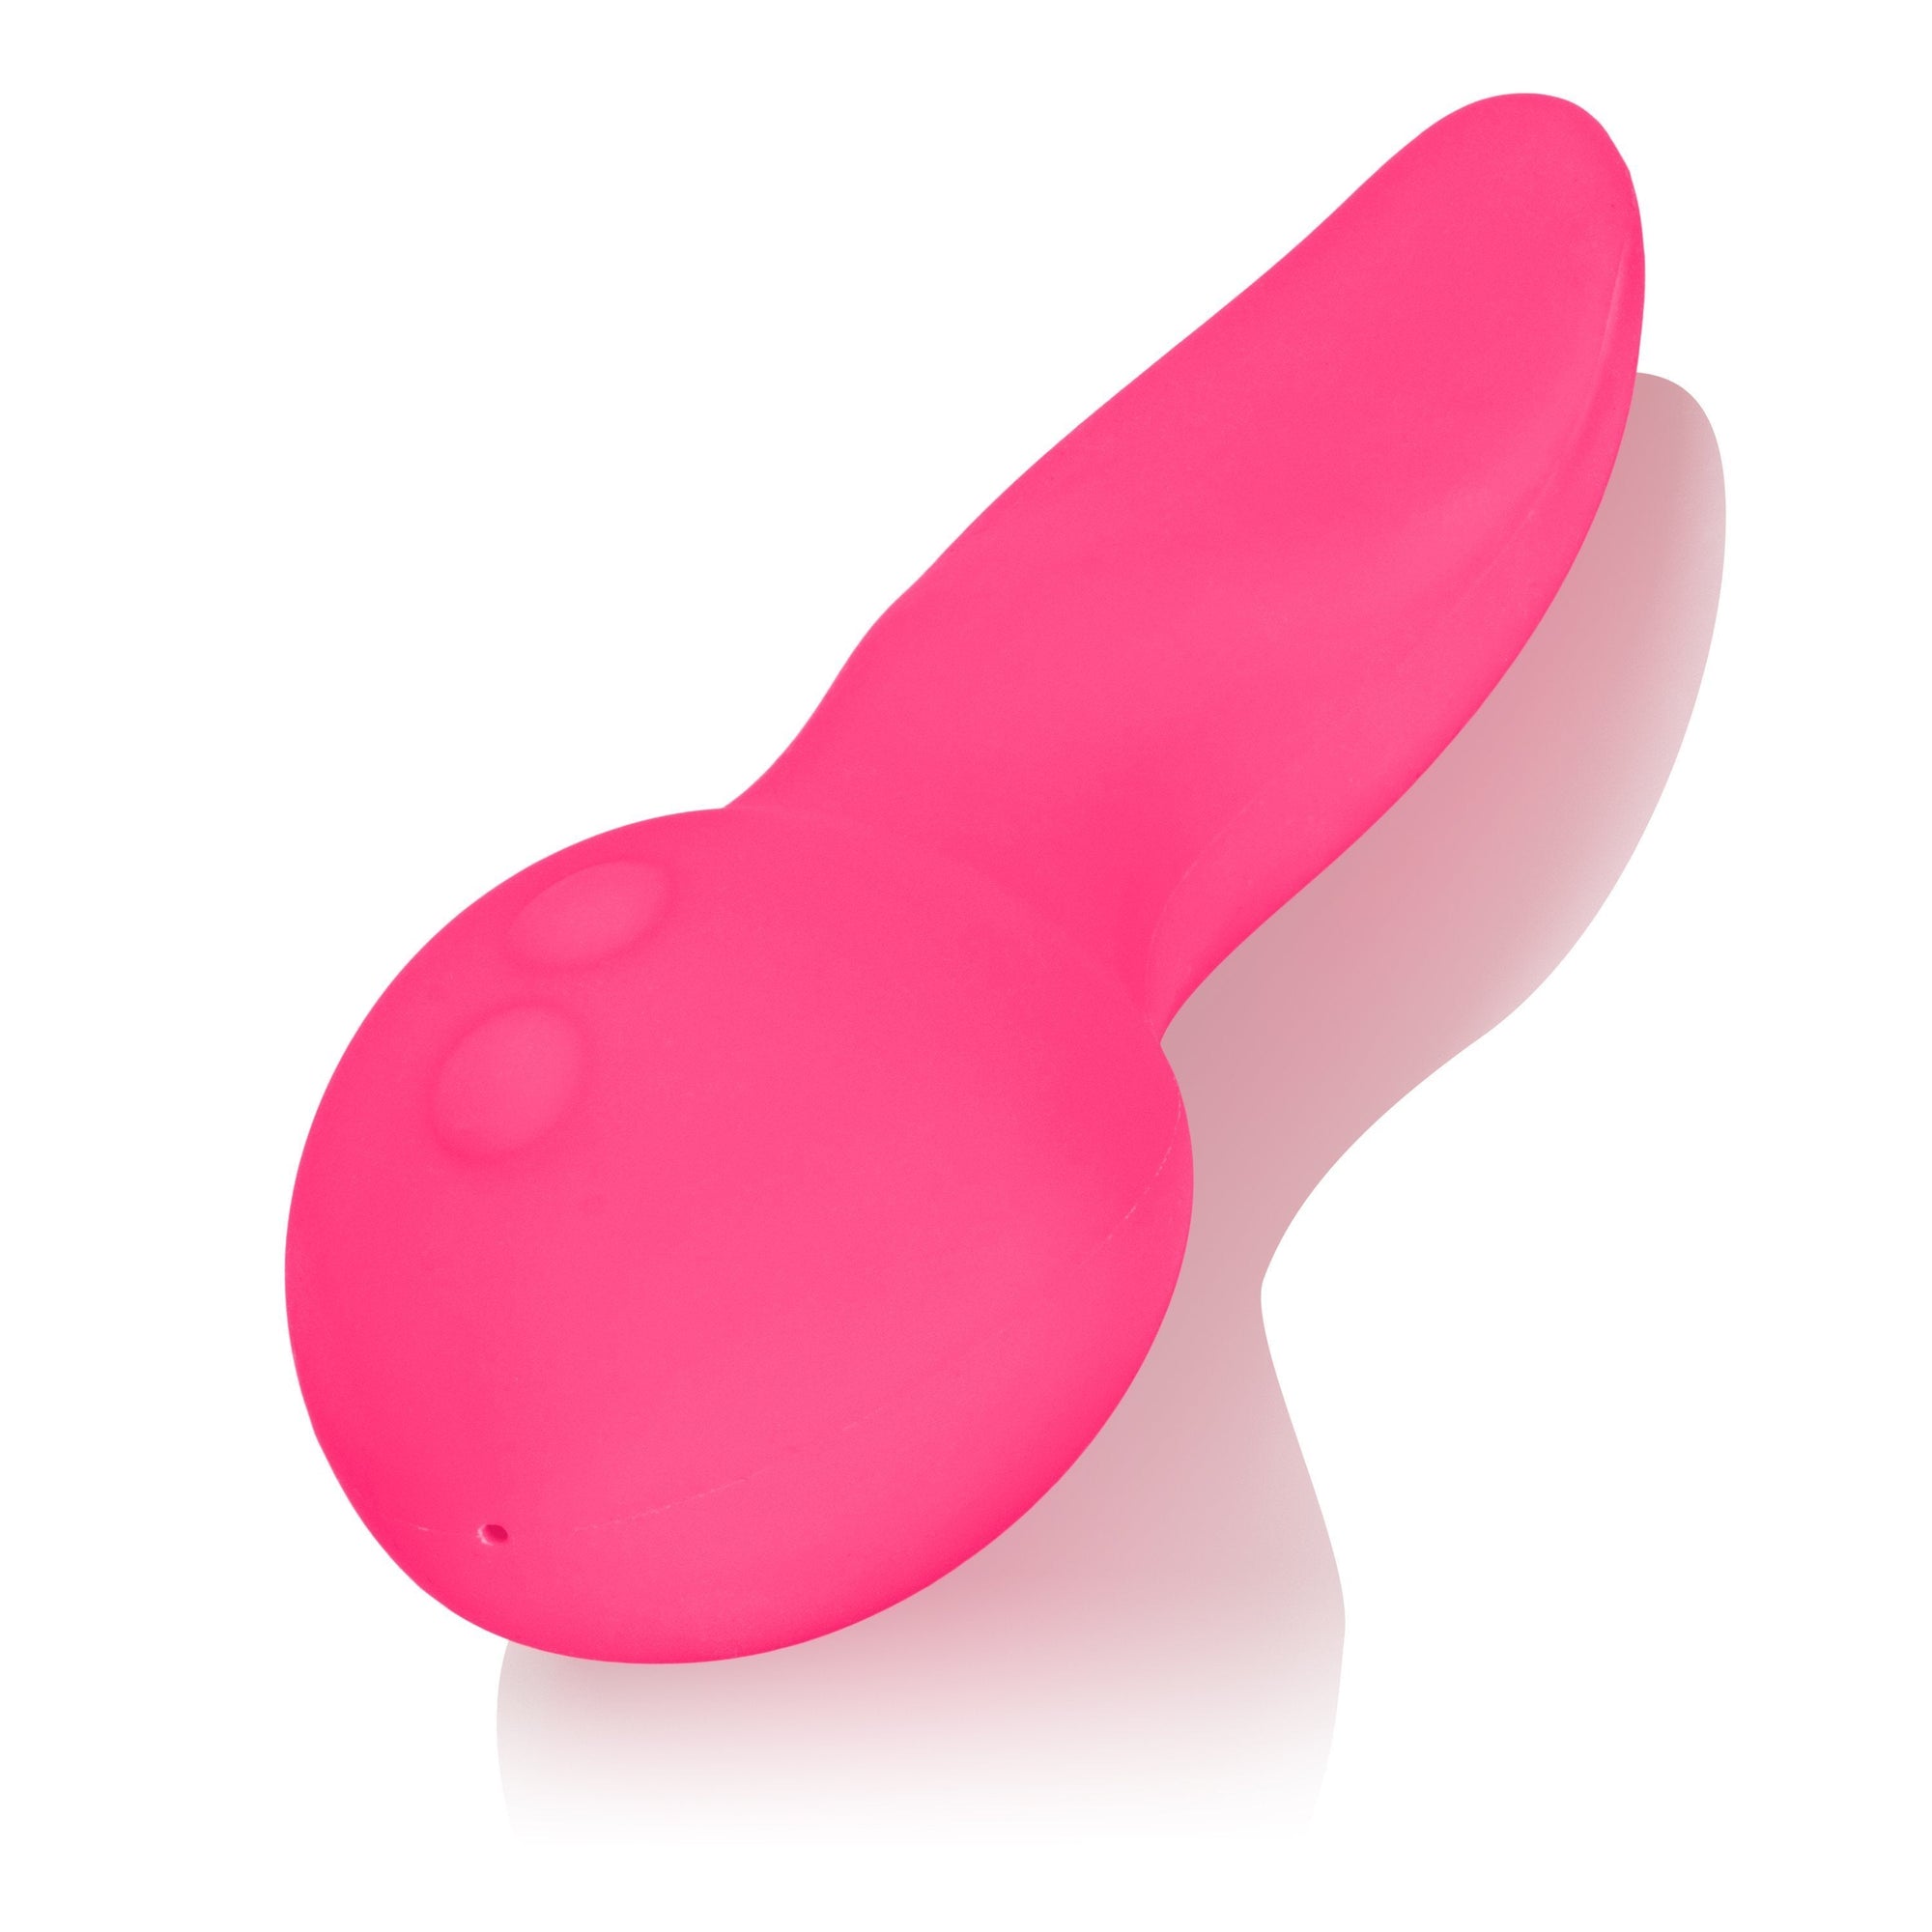 California Exotics - Mini Marvels Silicone Marvelous Flicker Clit Massager (Pink) -  Clit Massager (Vibration) Rechargeable  Durio.sg